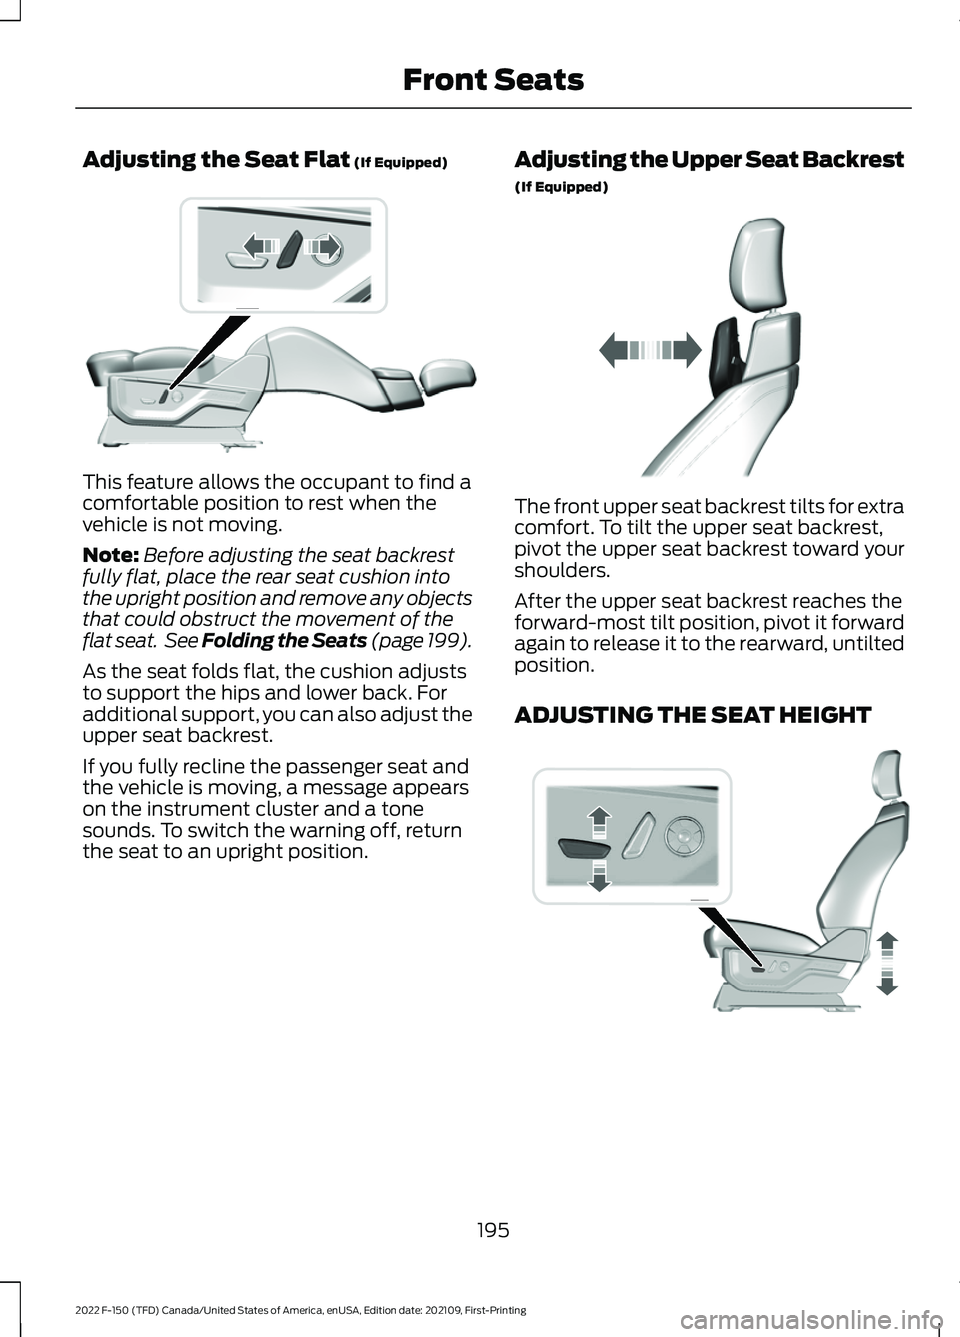 FORD F-150 2022  Owners Manual Adjusting the Seat Flat (If Equipped)
This feature allows the occupant to find a
comfortable position to rest when the
vehicle is not moving.
Note:
Before adjusting the seat backrest
fully flat, place